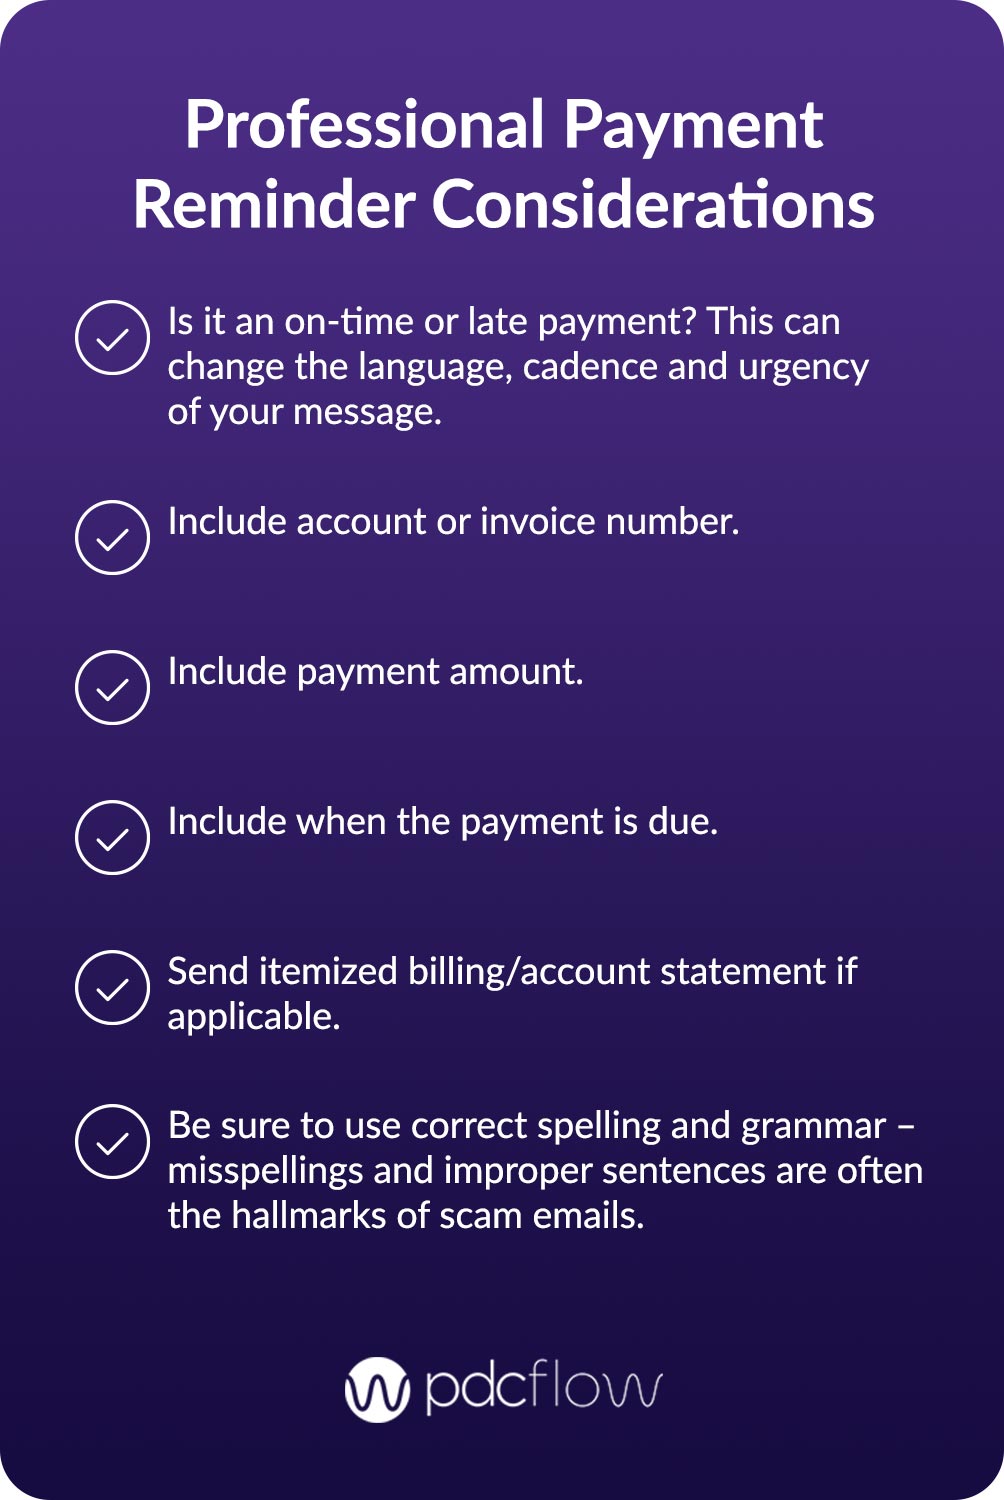 Professional Payment Reminder Considerations